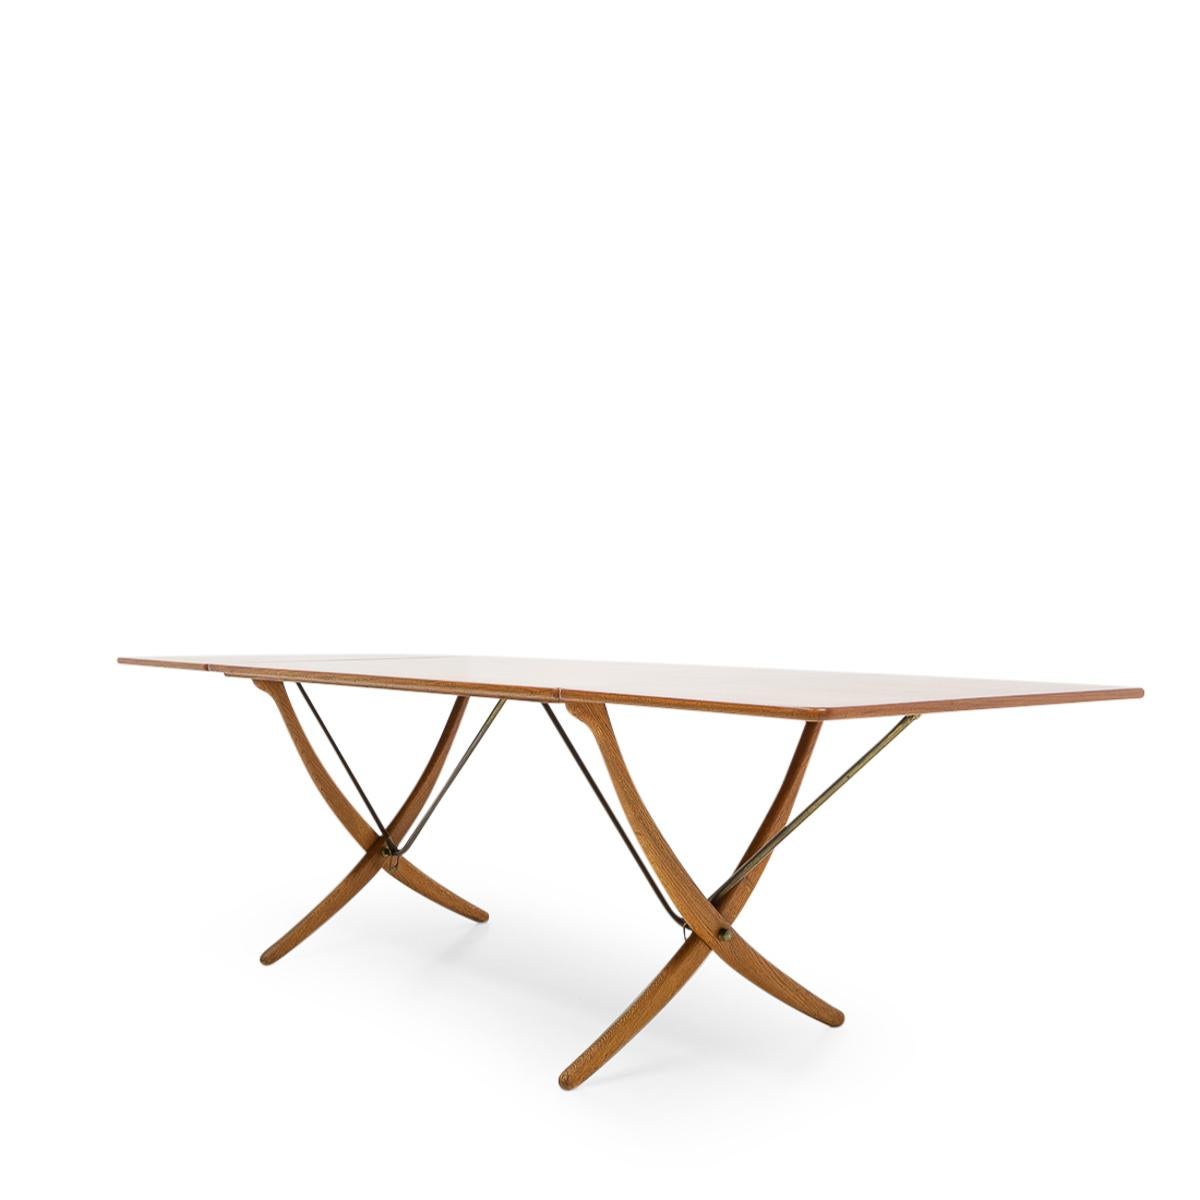 Beautiful “Sabre leg” extendible dining table by Hans Wegner for Andreas Tuck, designed during the 1950s and produced in Denmark. 

The model AT-304 dining table features two foldable extension leaves supported by a construction of brass supports.